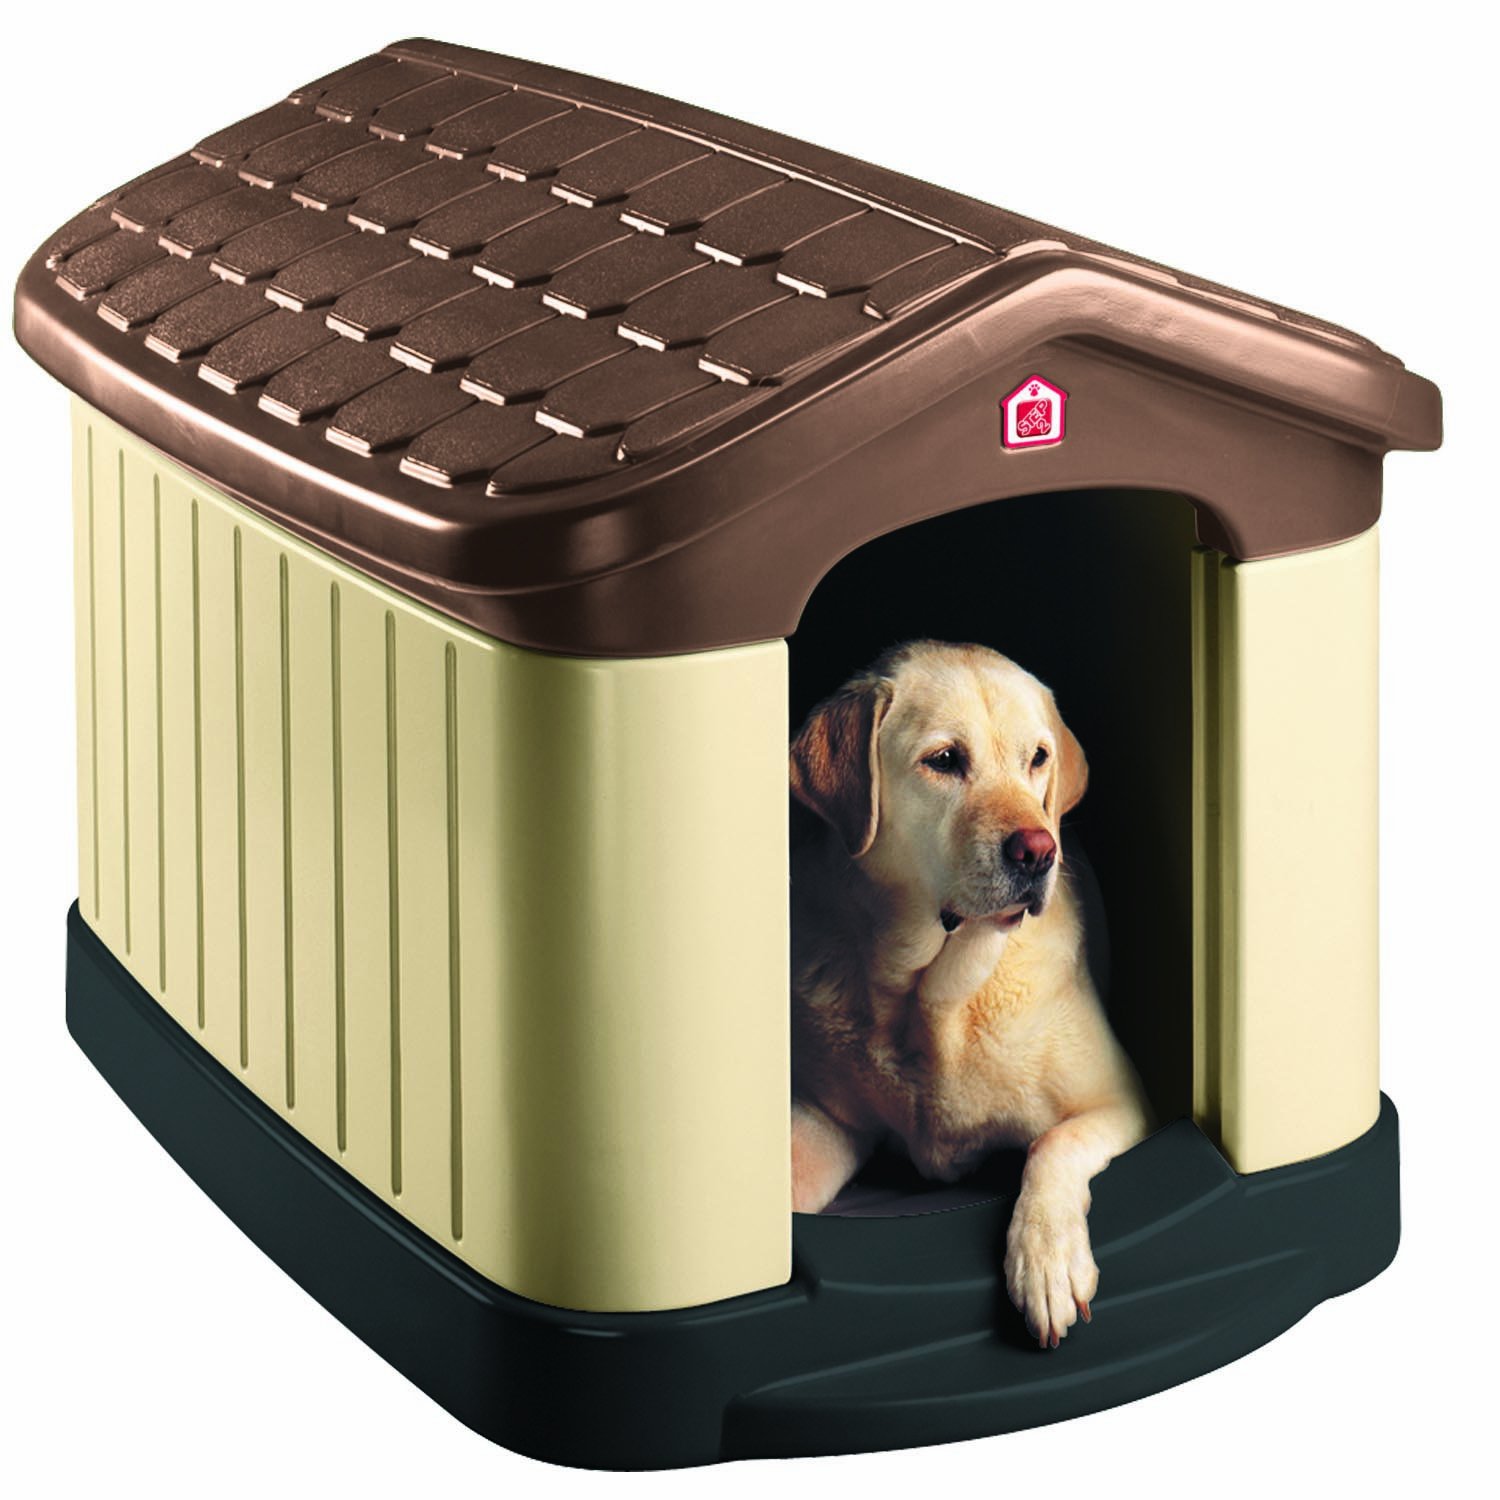 Pet Zone Our Pets Tuff-N-Rugged Dog House